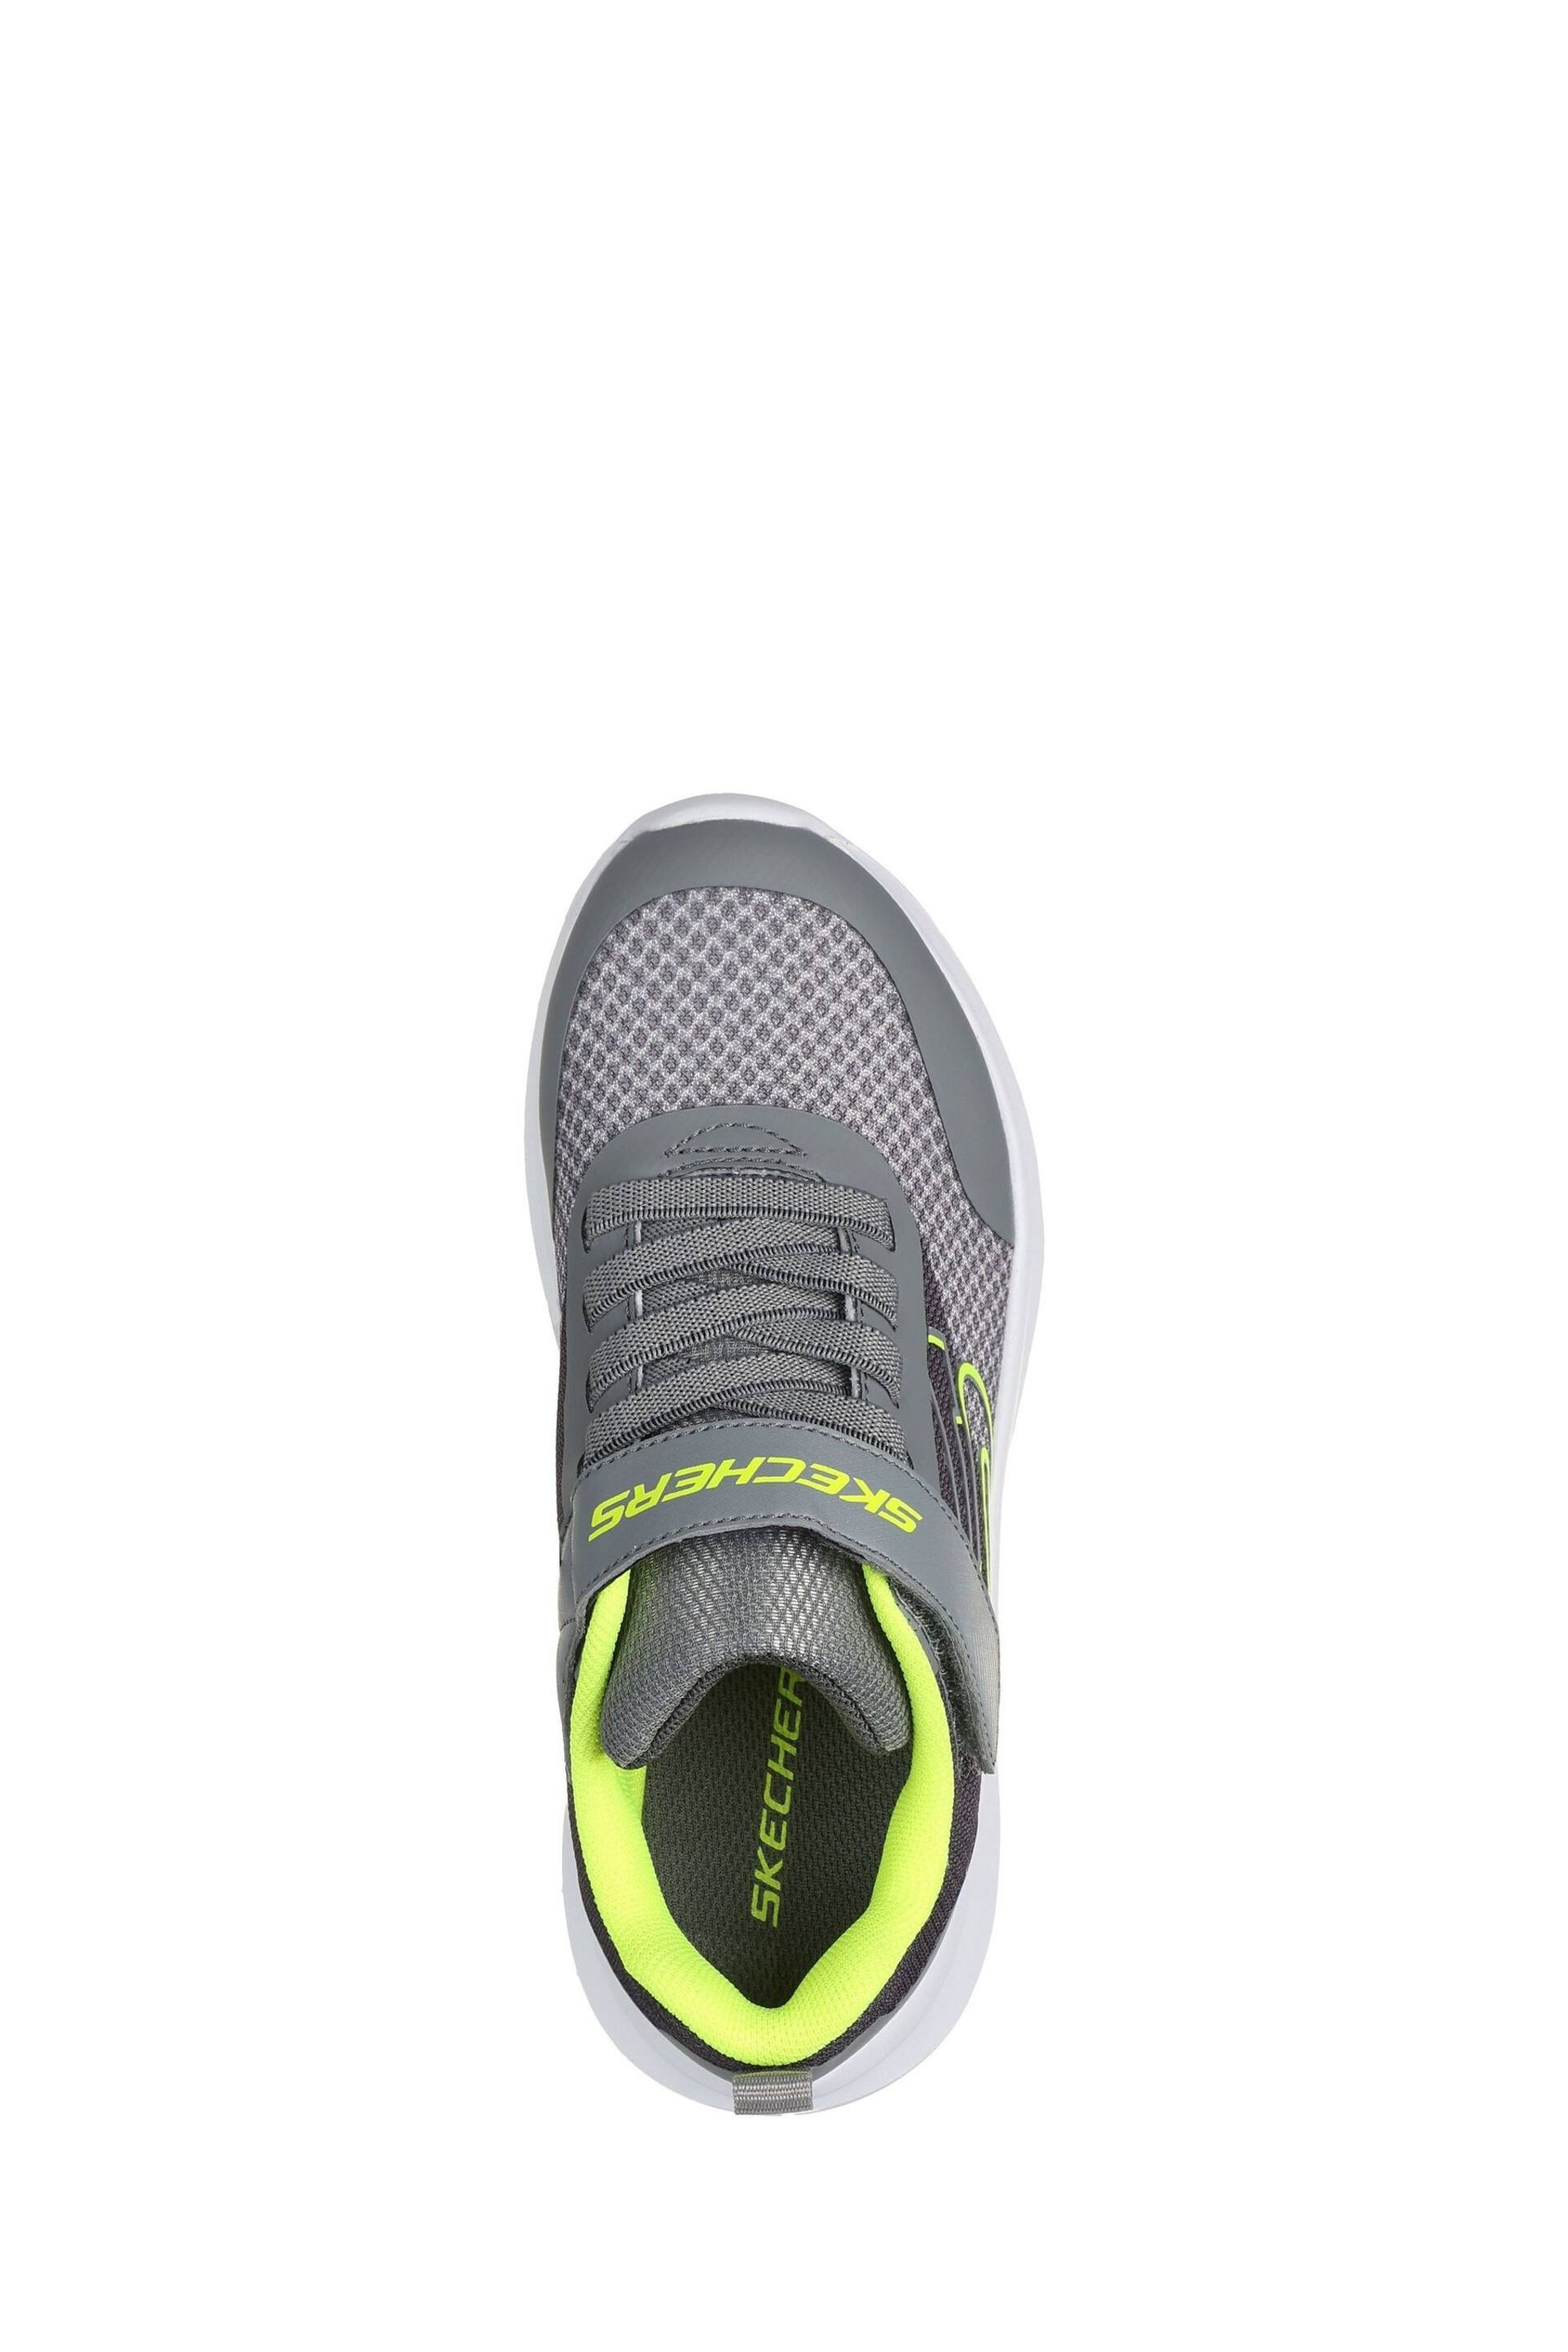 Skechers Grey Fast Solar Squad Trainers - Image 4 of 5